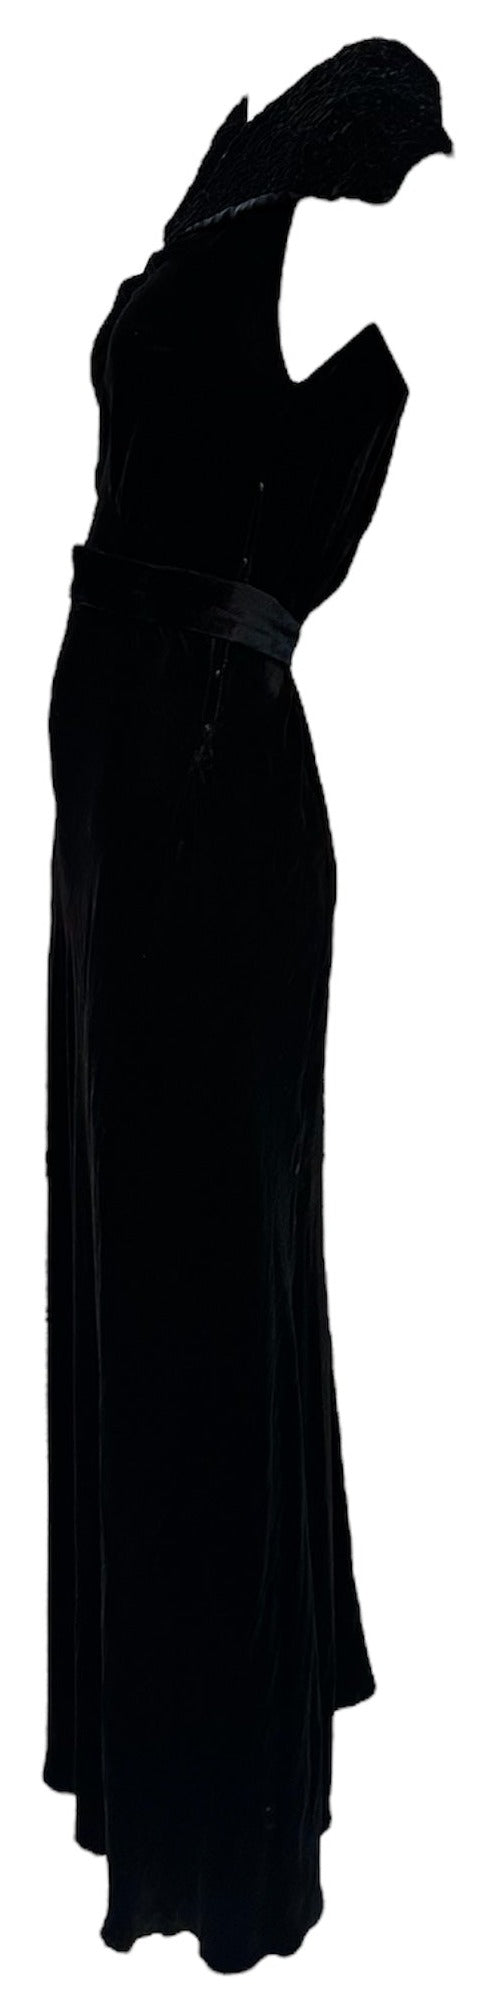 30s Black Silk Velvet Bias Cut Gown with Exaggerated Collar with Trapunto Stitching and  Diamante Belt Buckle SIDE 2 of 6